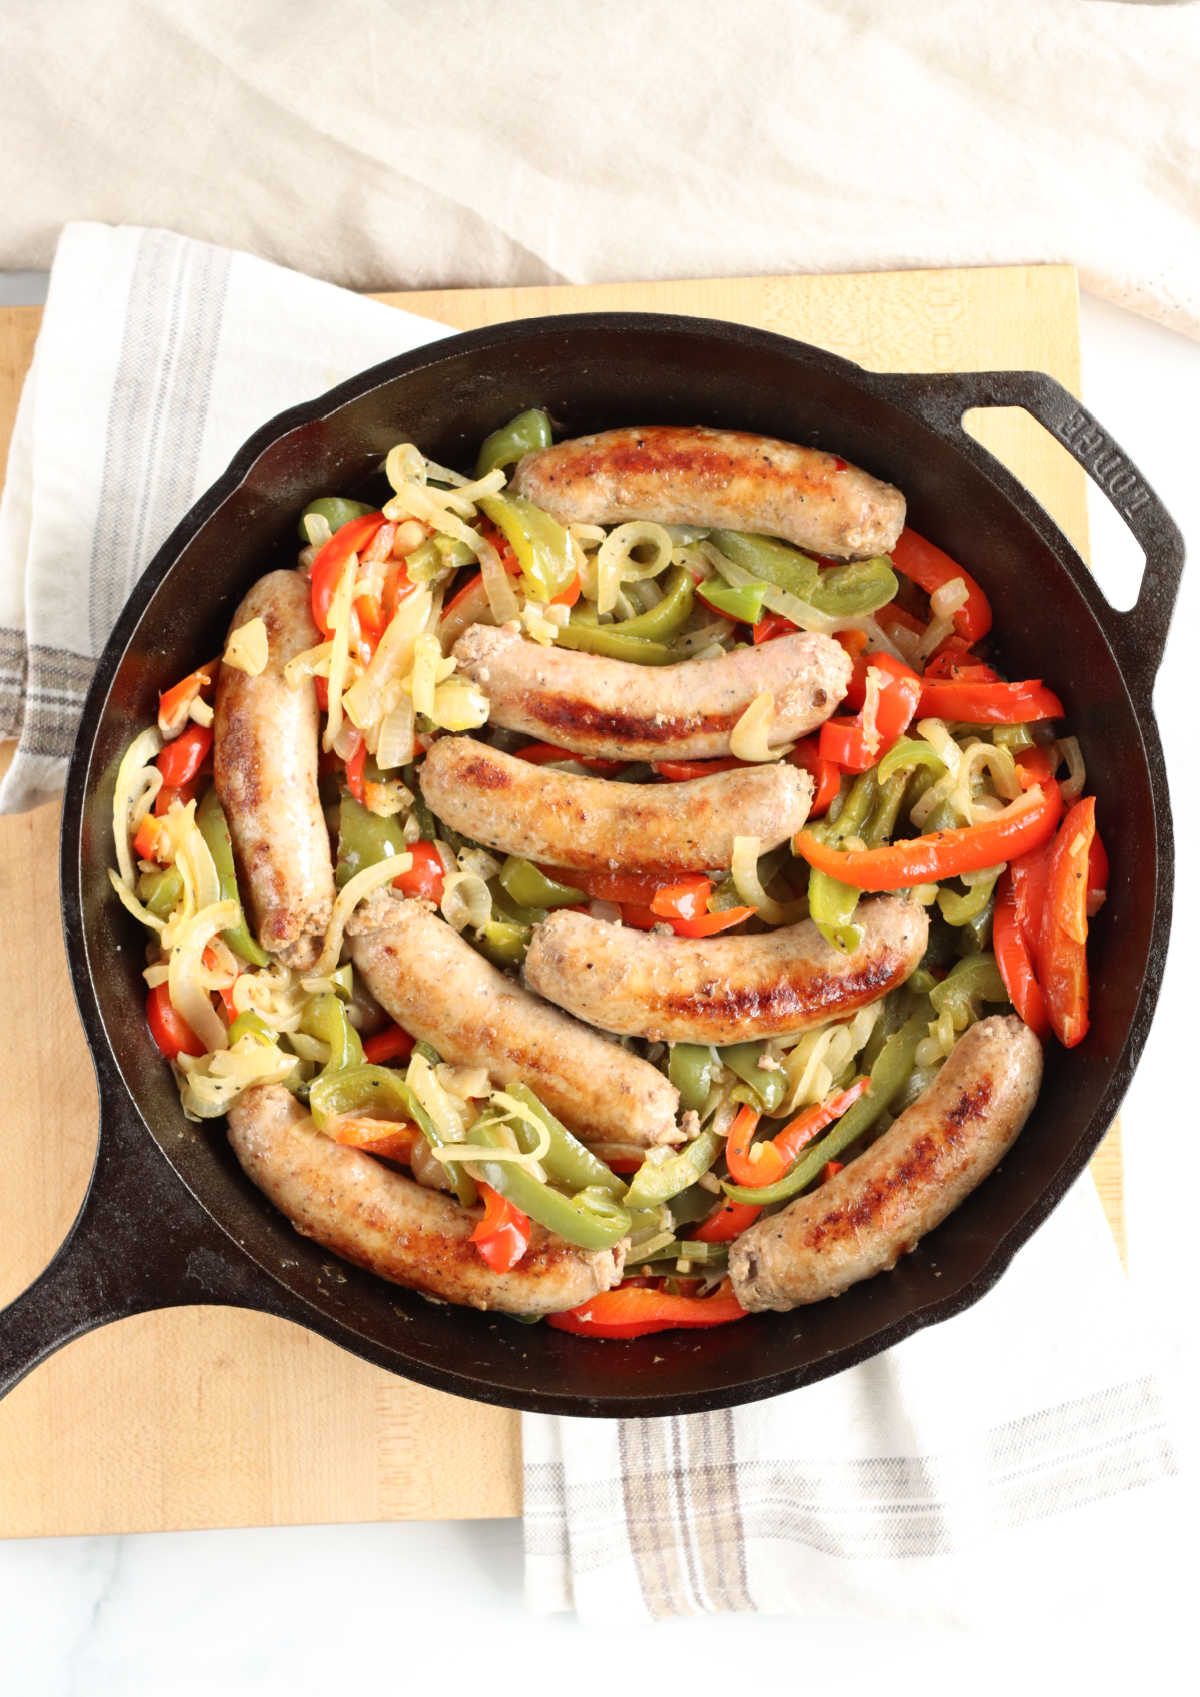 Sausage links, onions, green and red Bell peppers in cast iron skillet on wooden cutting board.